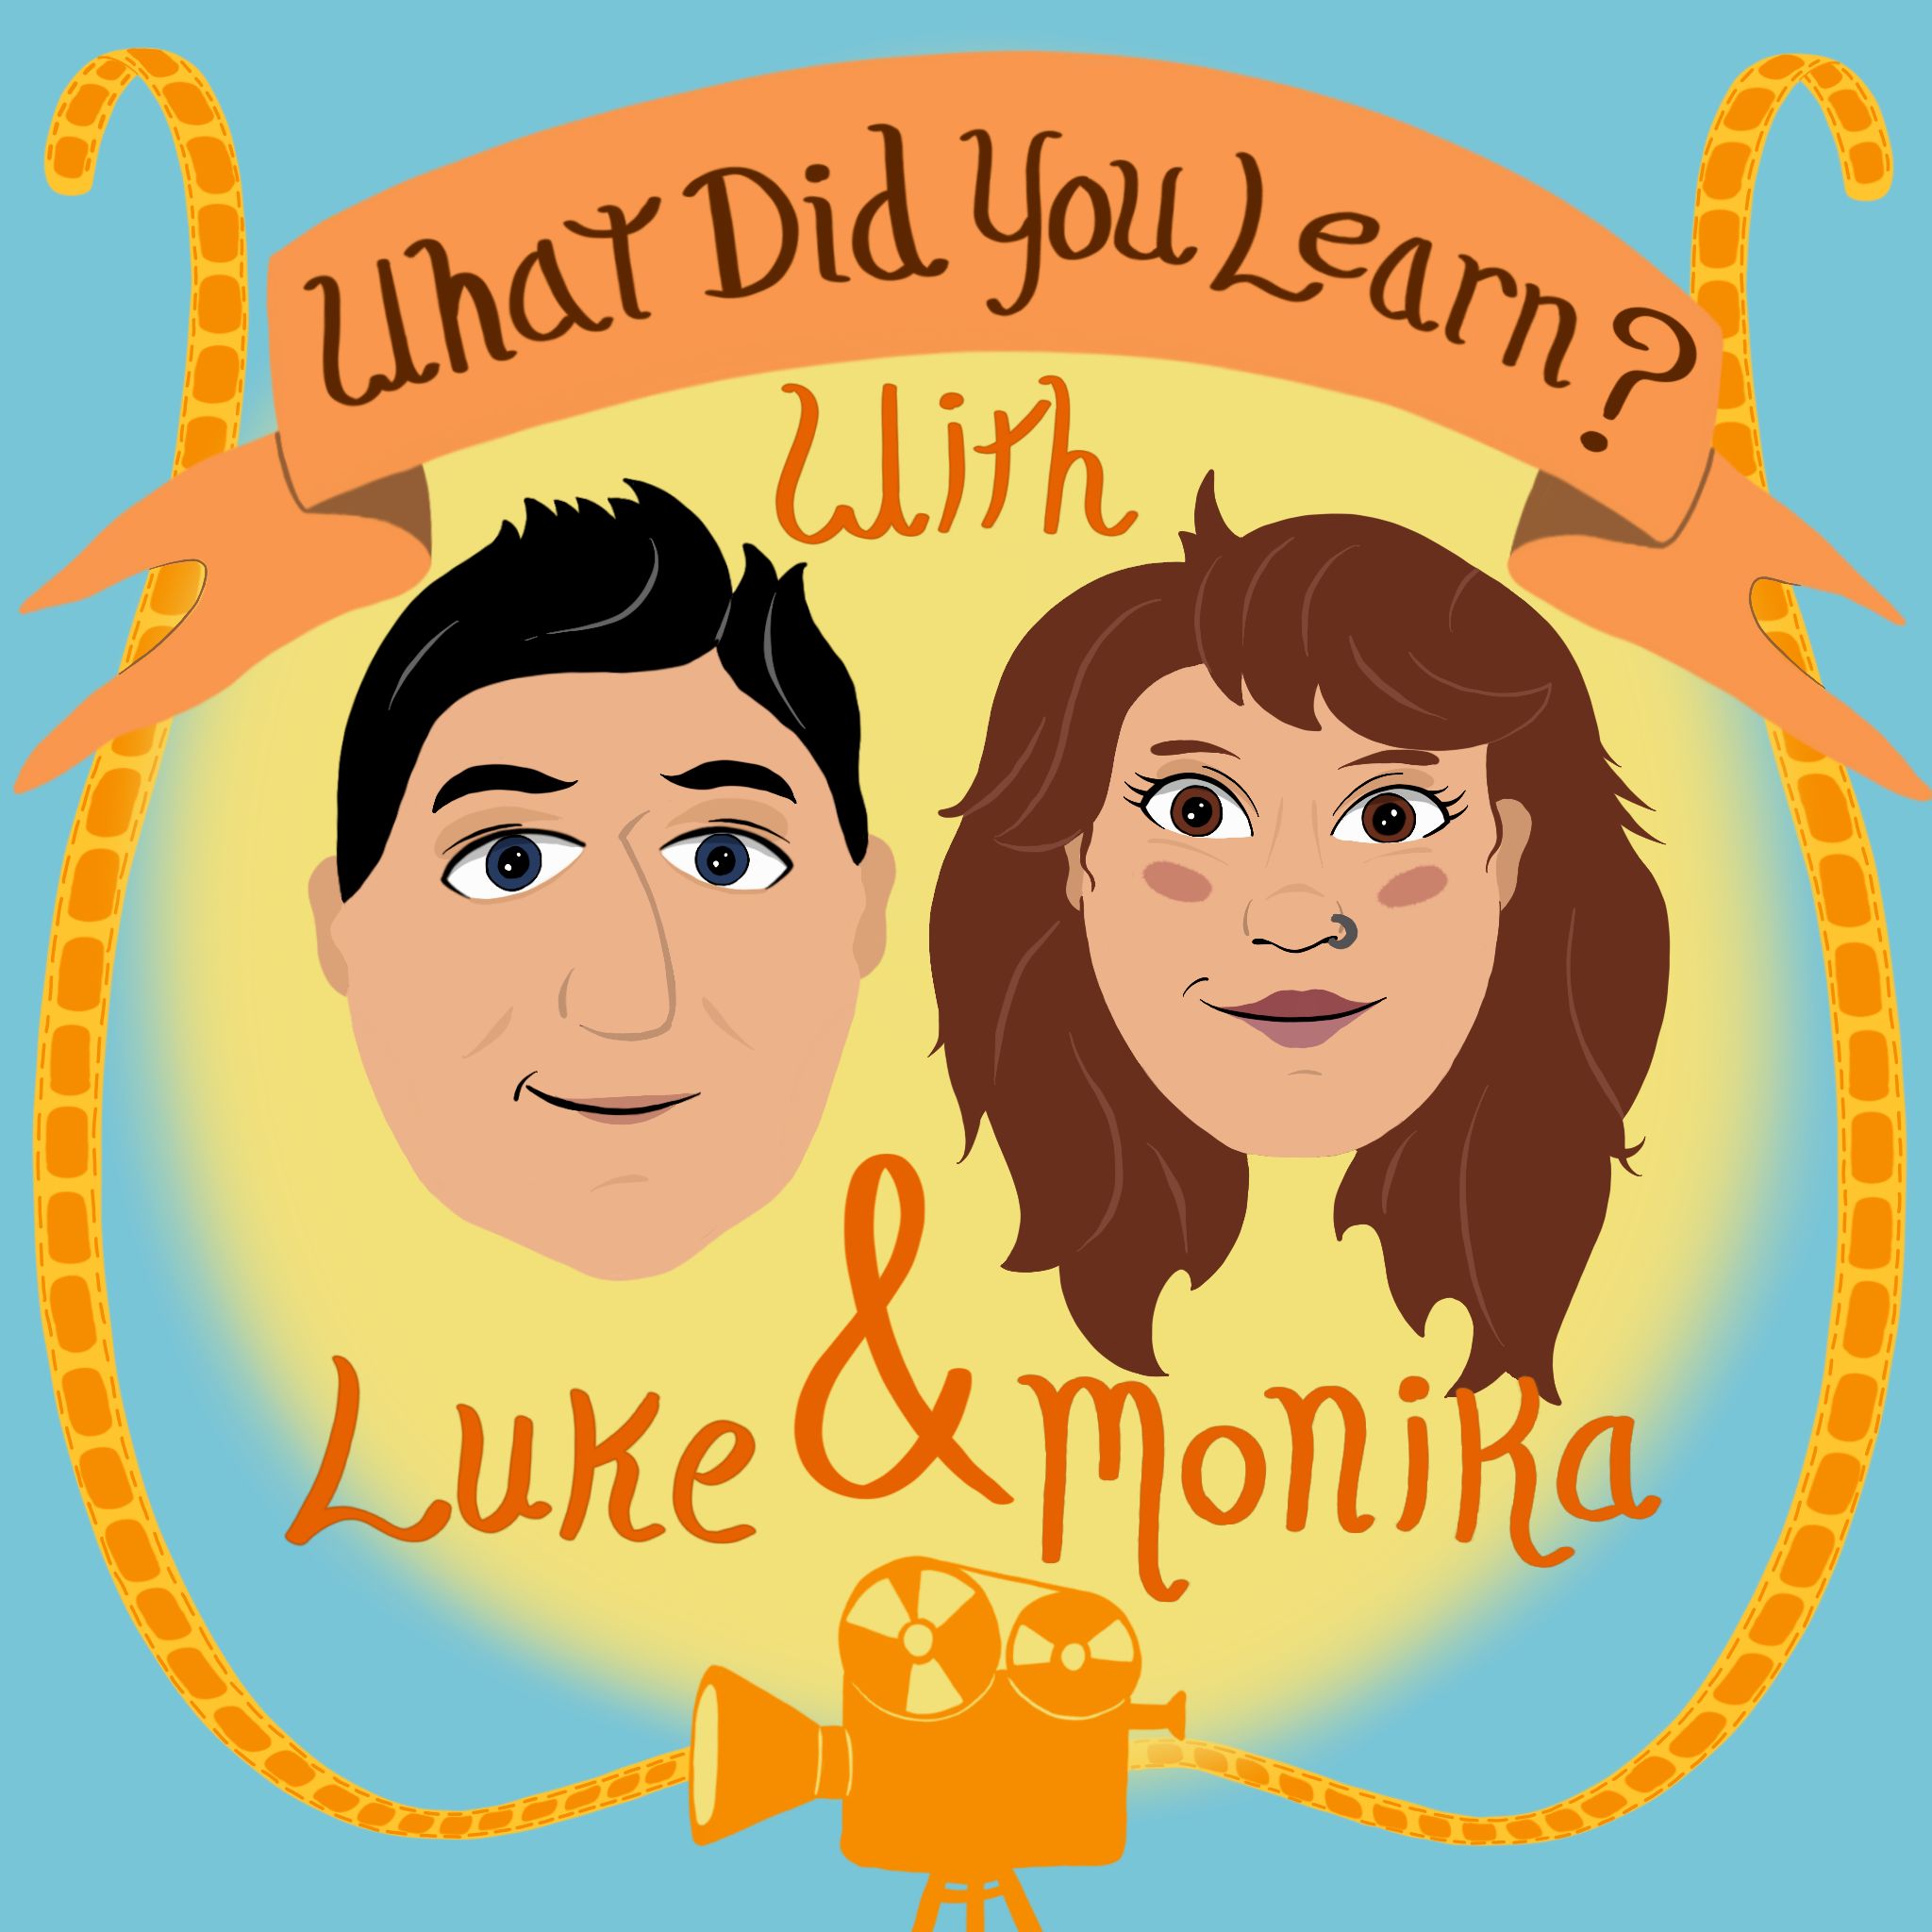 What did you Learn? Listen via Stitcher for Podcasts